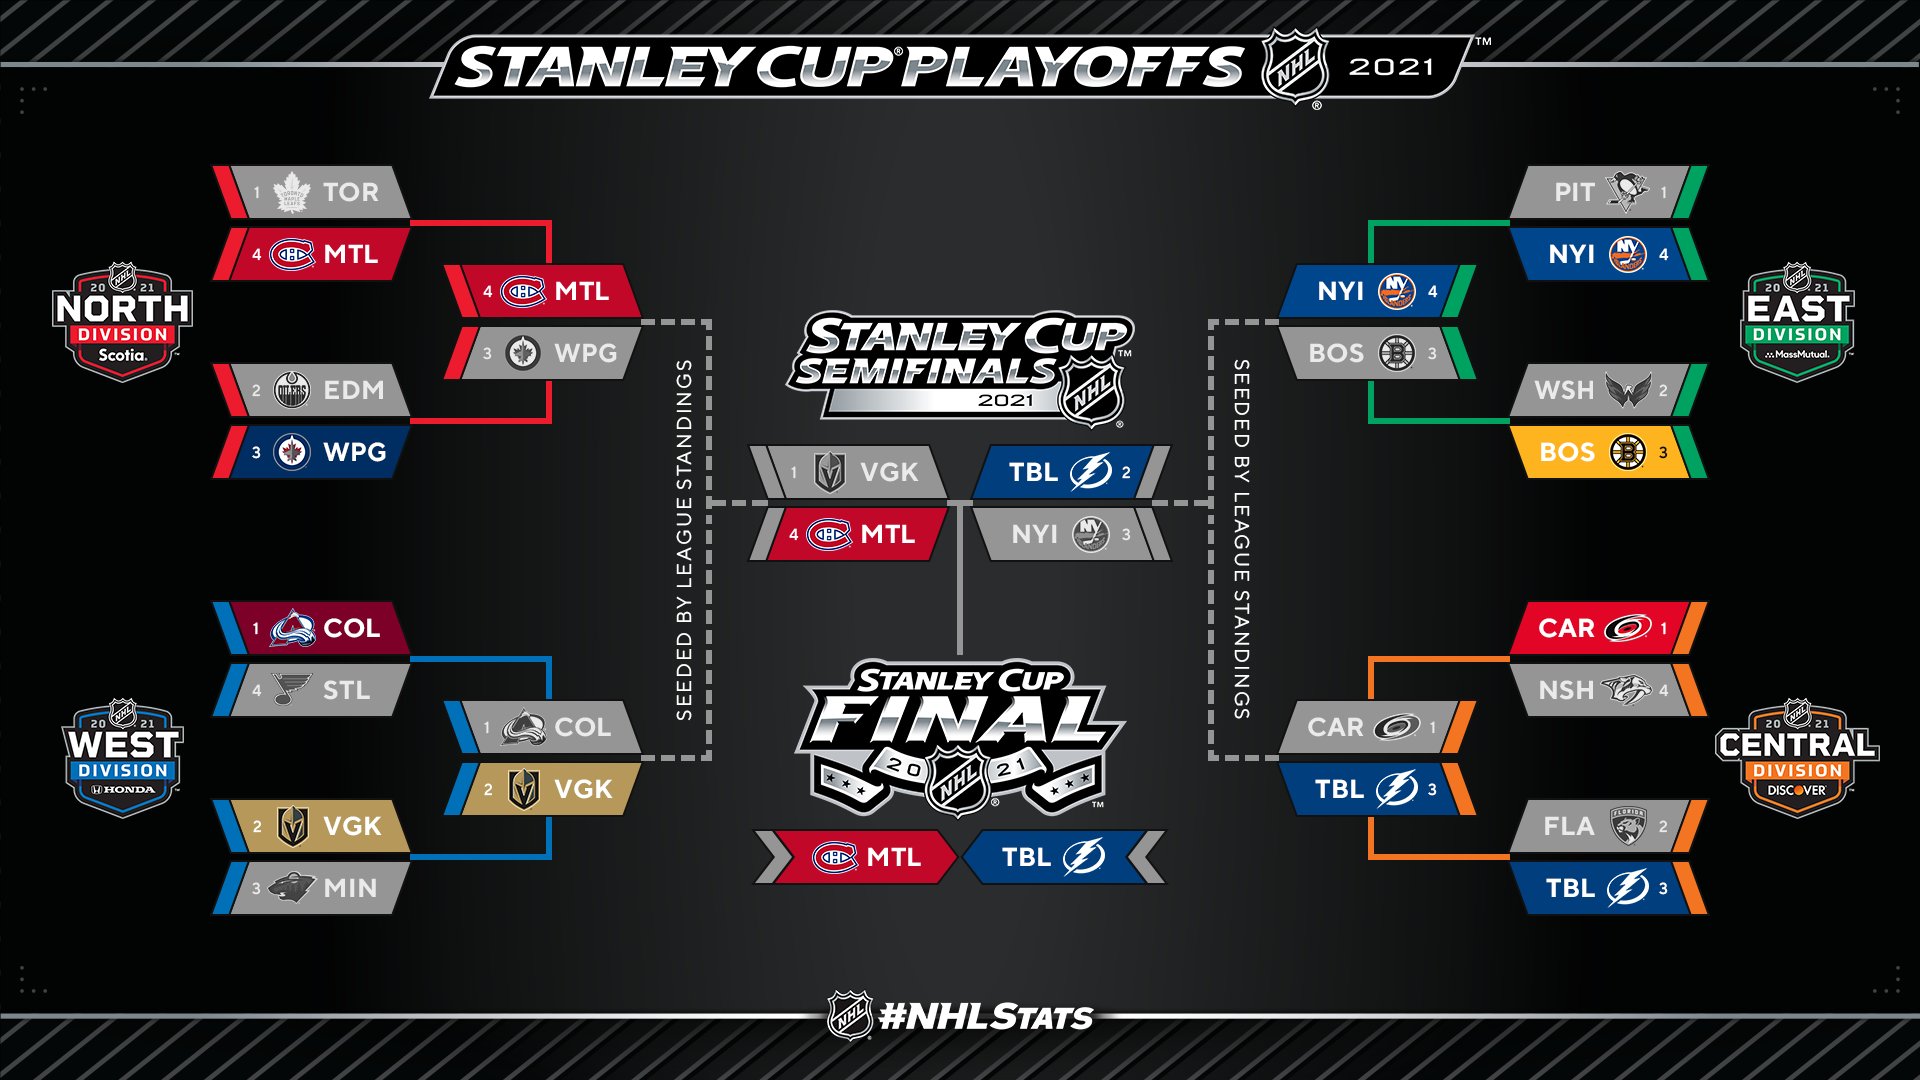 2021 Stanley Cup Final: Analysis, schedule and TV info – The Swing of Things